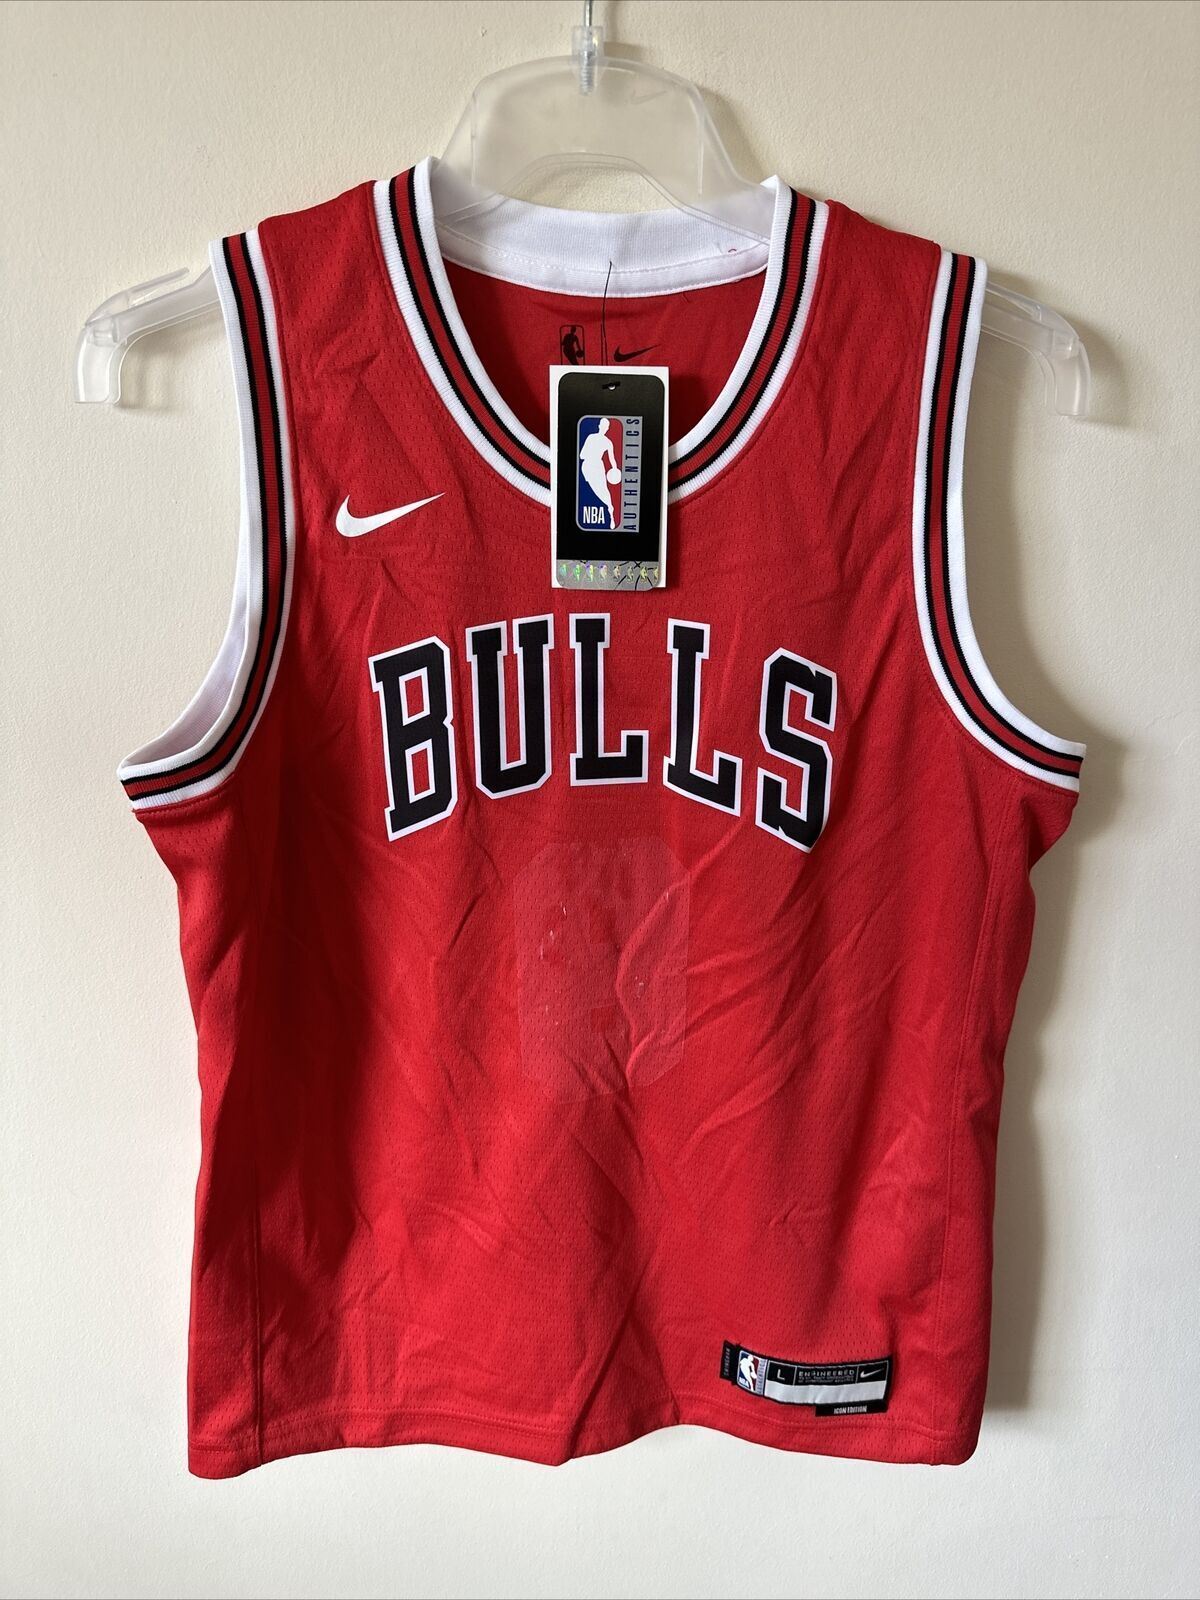 Nike NBA Chicago Bulls Icon Edition Jersey LAVINE Basketball Youth 12-13 Years